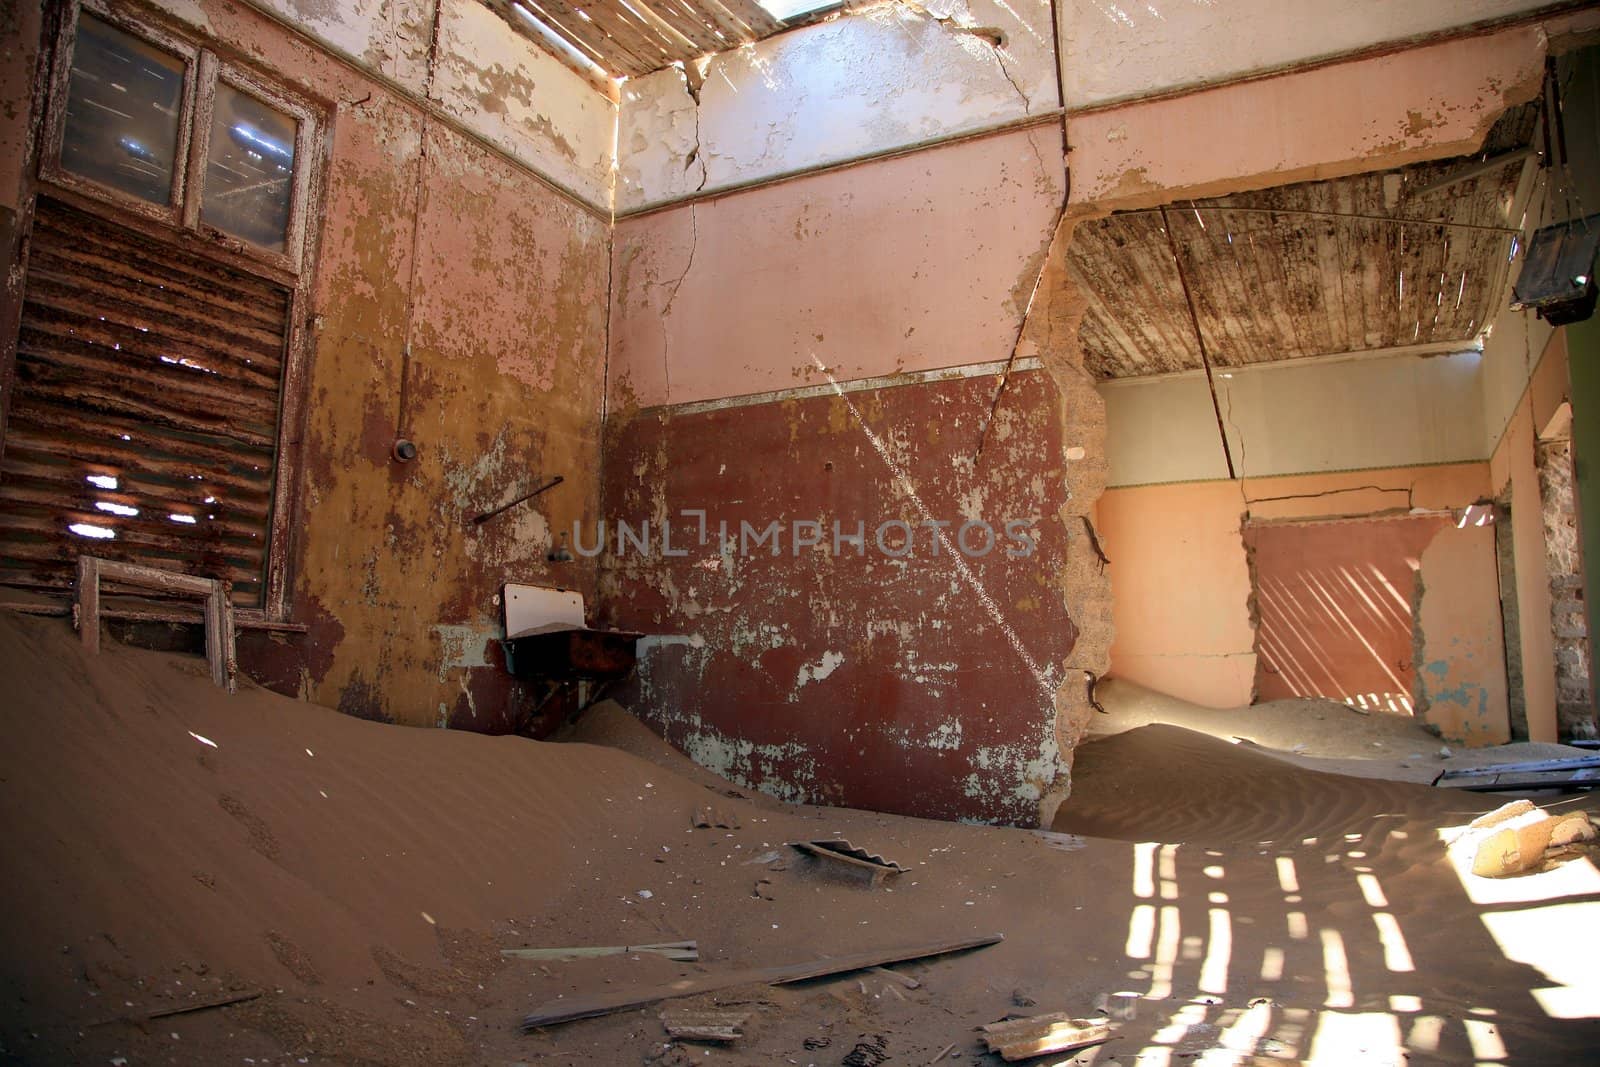 A small sand dune formed in an old derelict house in Kolmanskop, Namibia